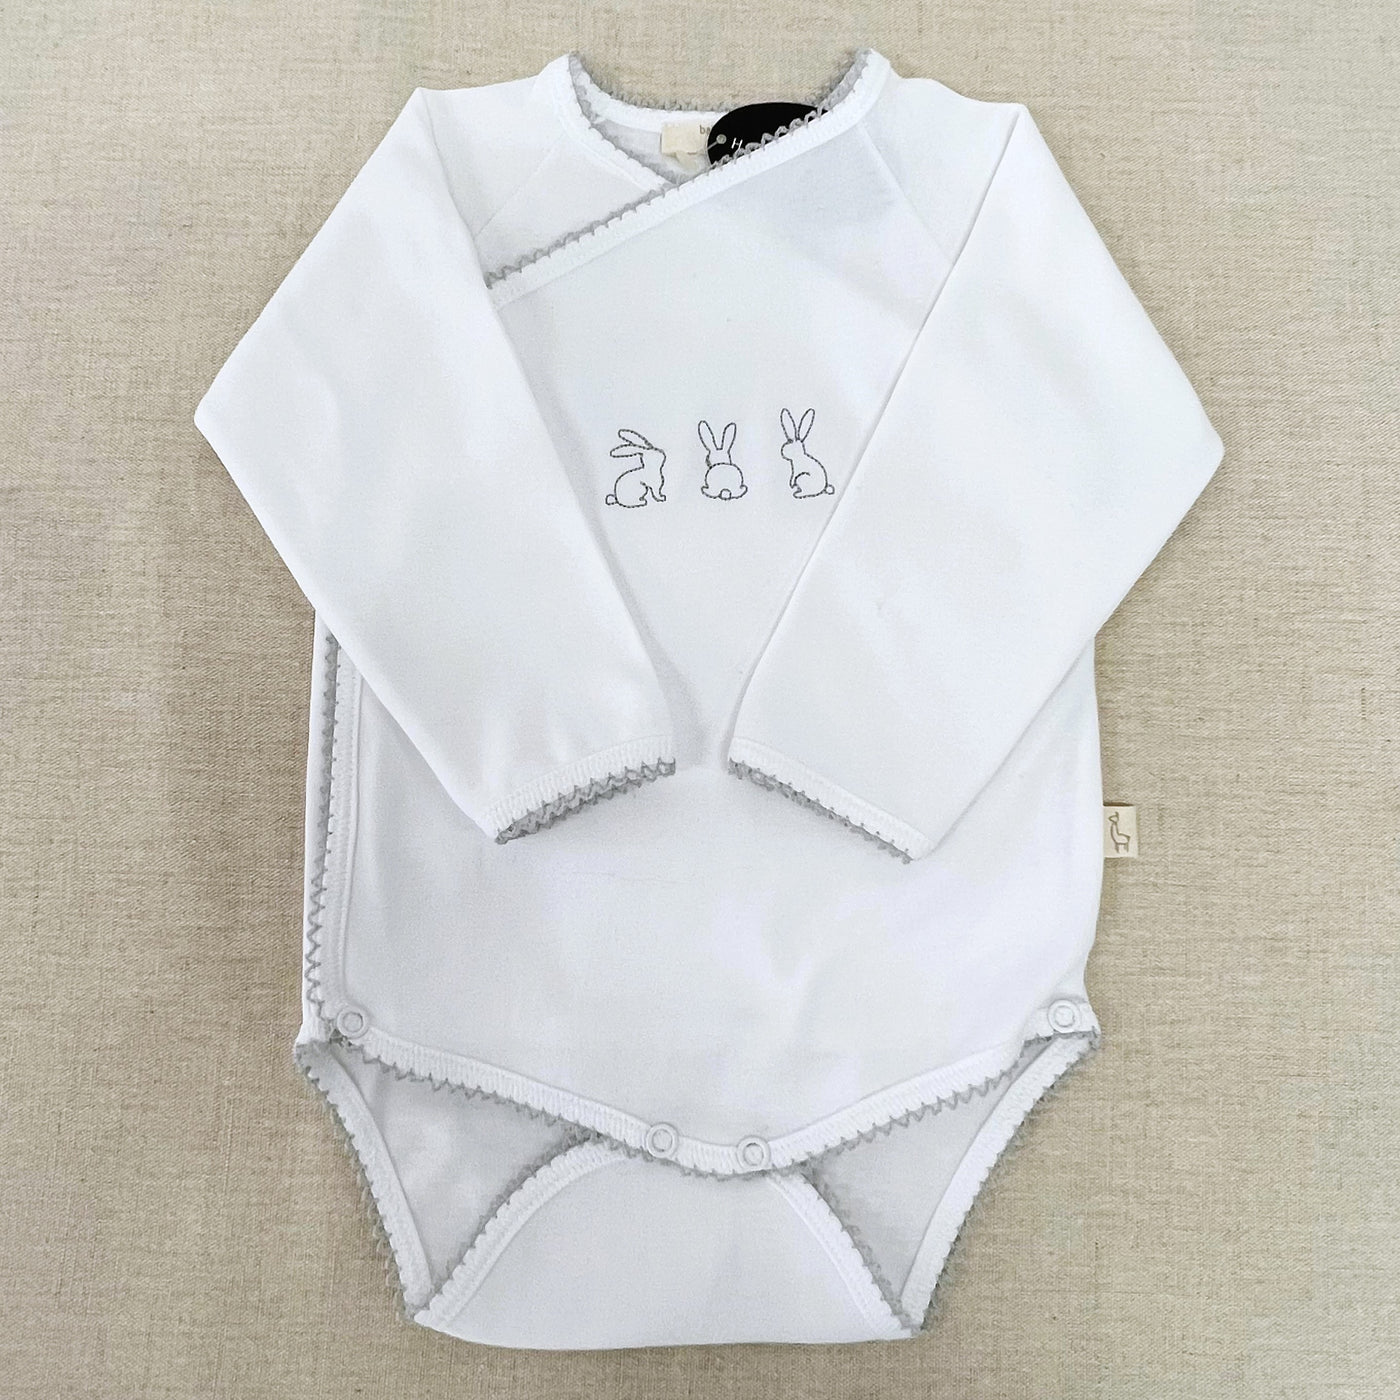 Baby Suit Long White With Grey Embroidery 3-6 months